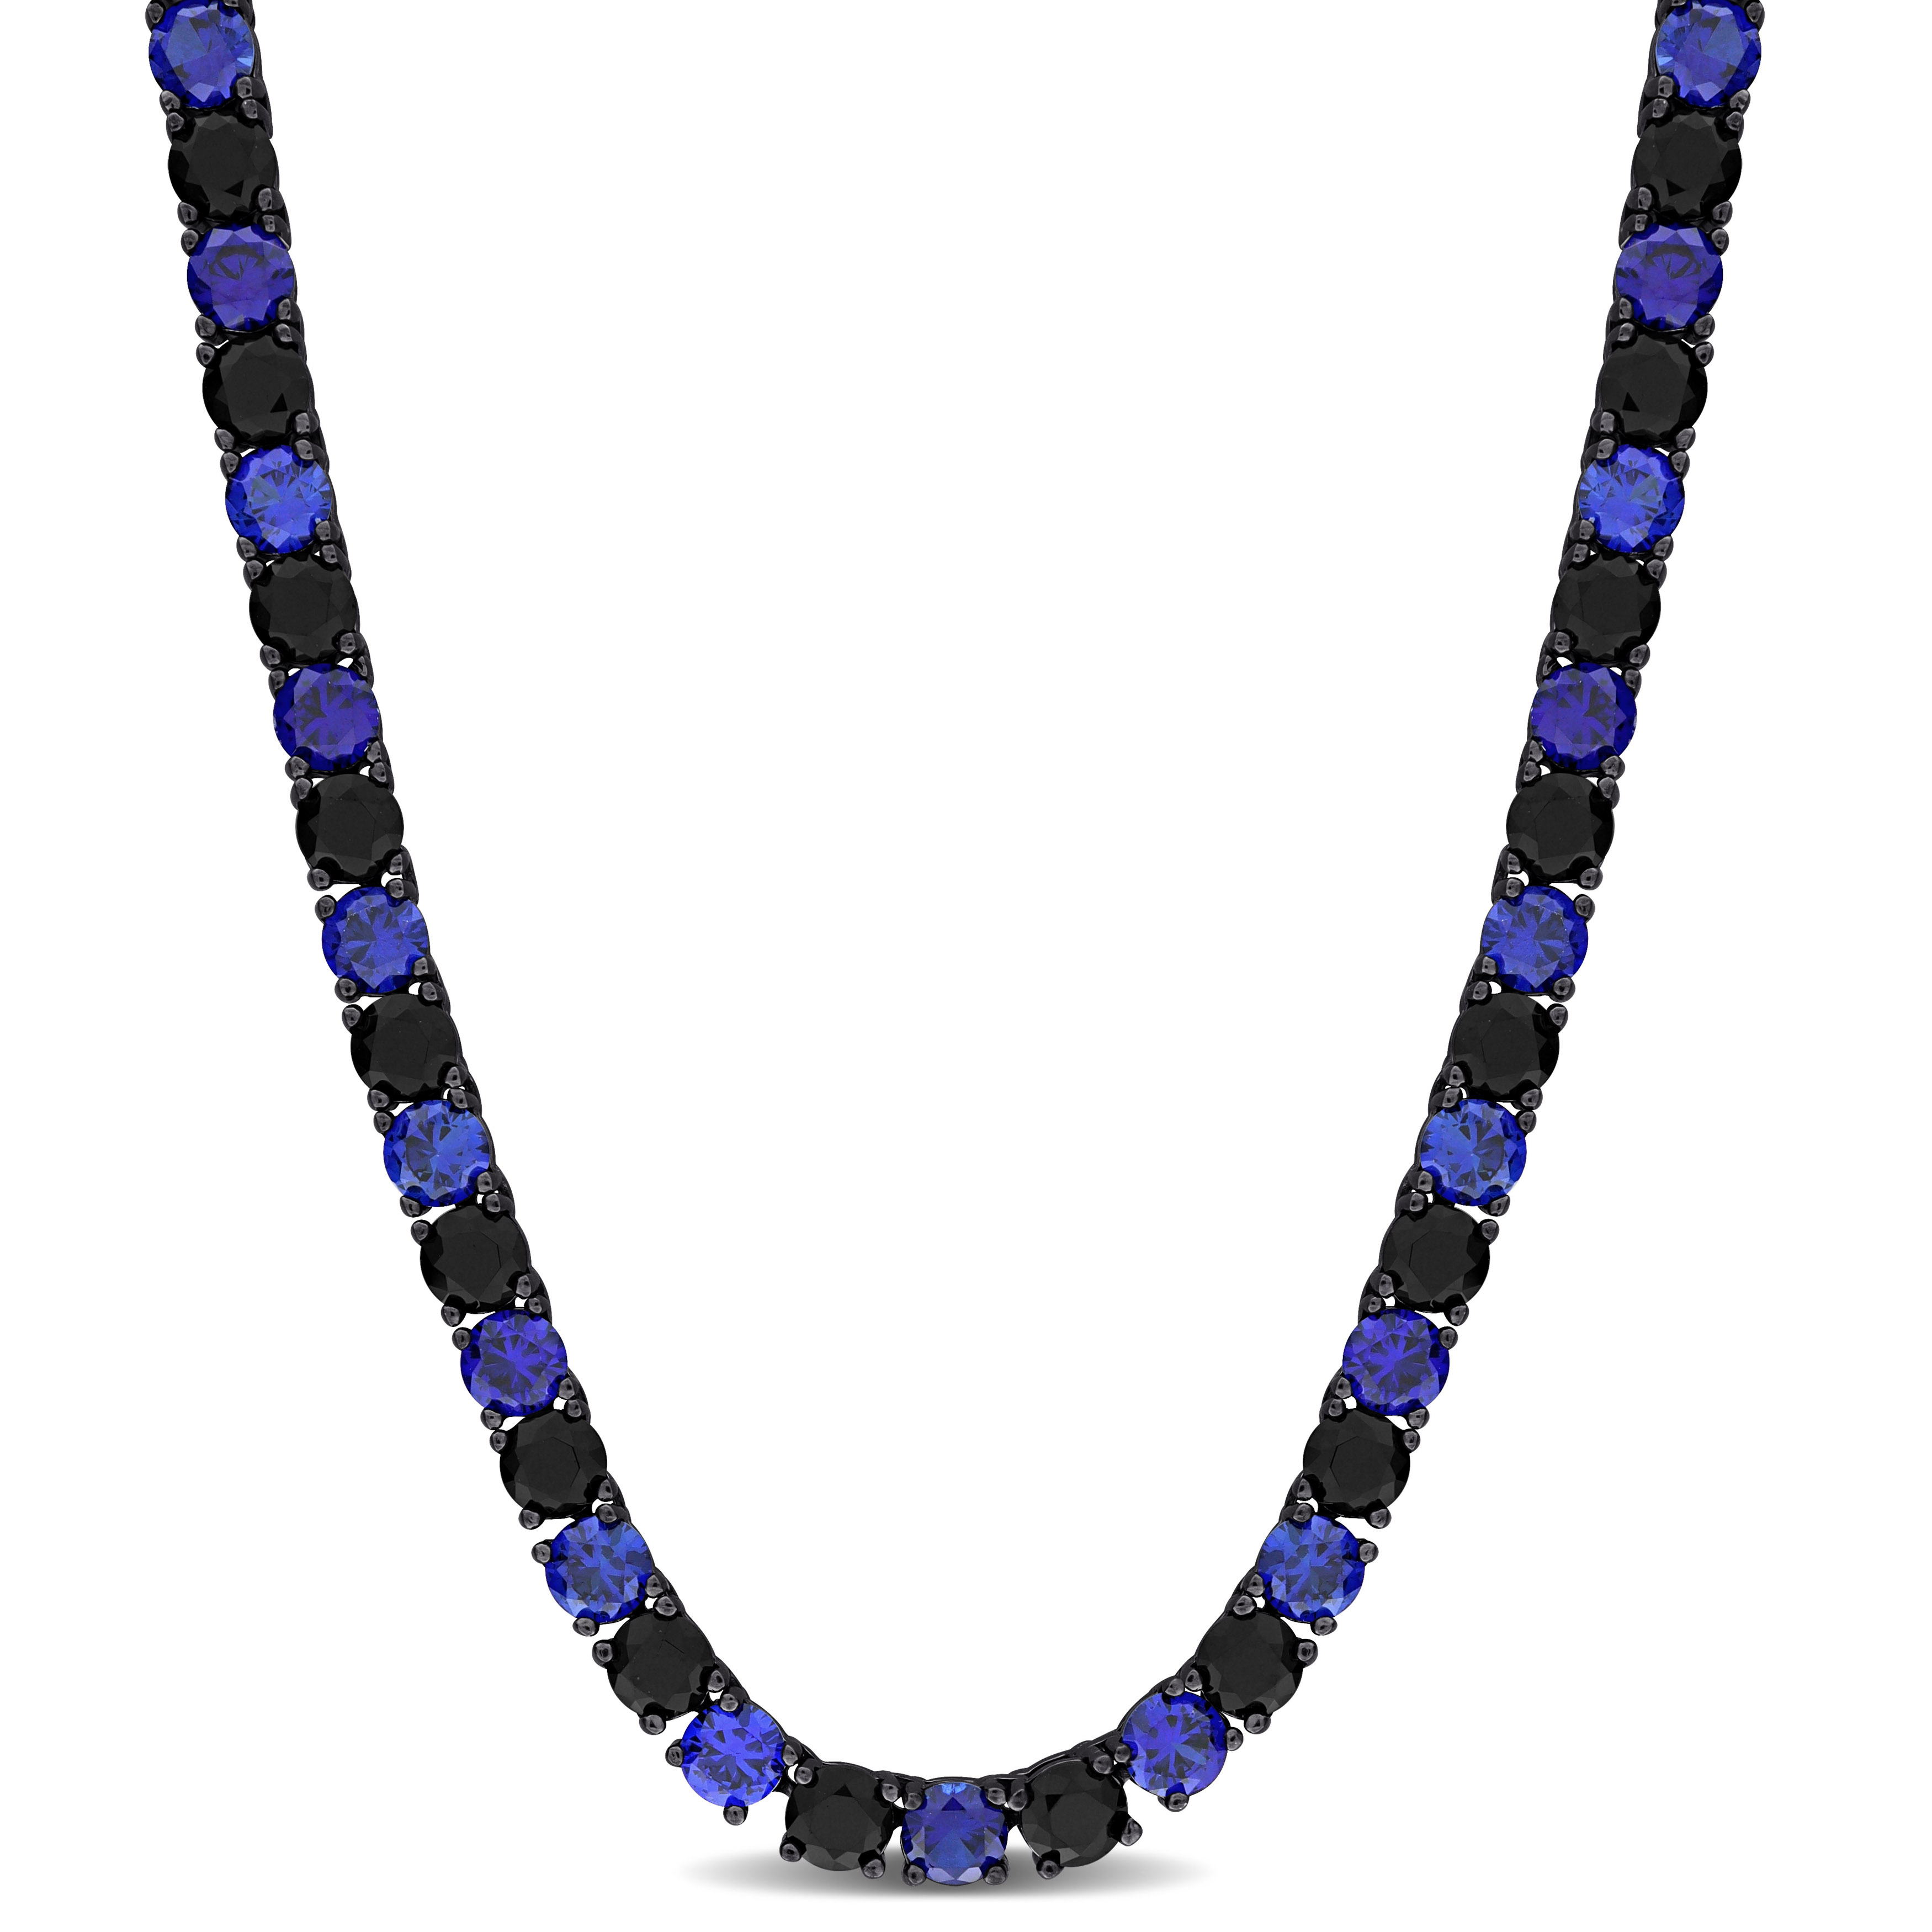 40 1/4 CT TGW Created Blue and Black Sapphire Men's Tennis Necklace in Black Rhodium Plated Sterling Silver - 20 in